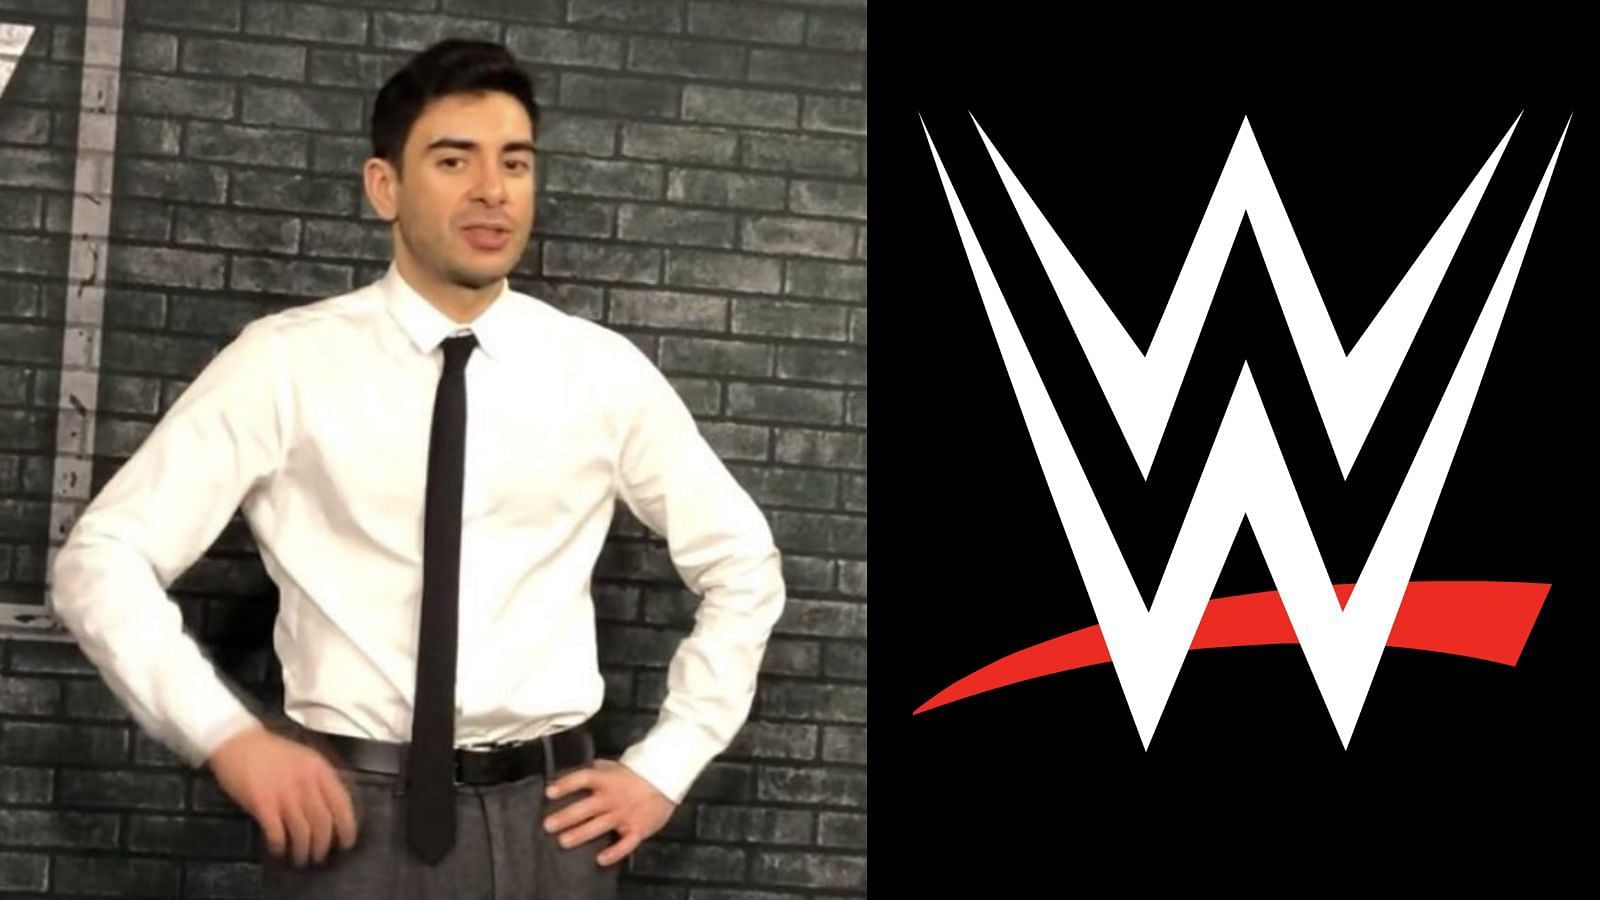 Will Khan ever manage to catch up to WWE?